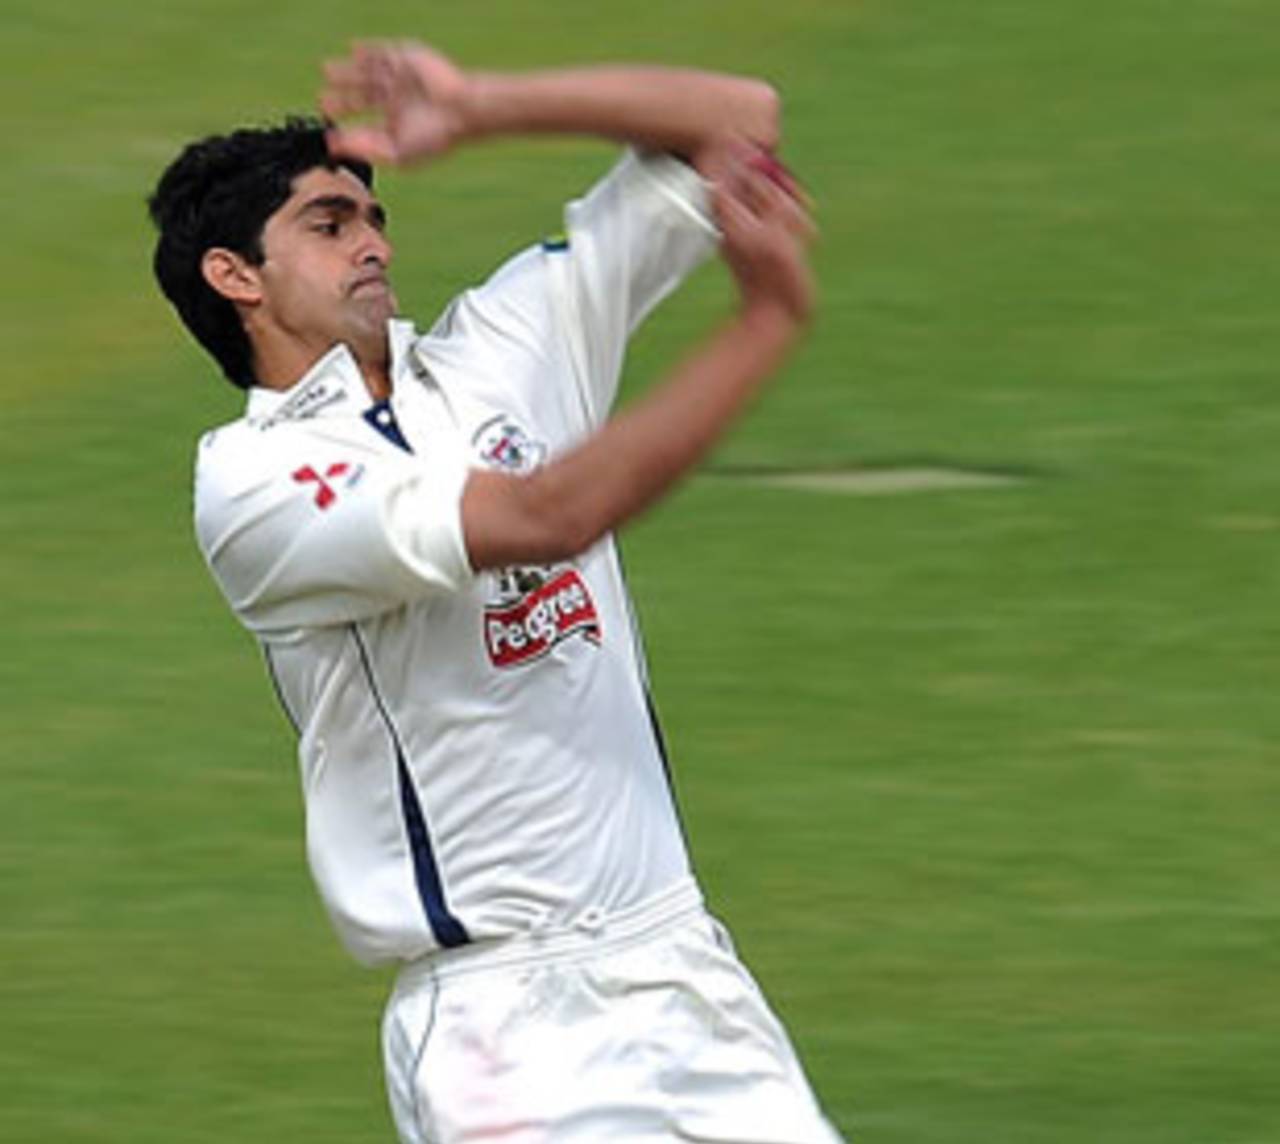 Gemaal Hussain on his way to a matchwinning five-wicket haul, Middlesex v Gloucestershire, County Championship, Division Two, Lord's, April 30, 2010